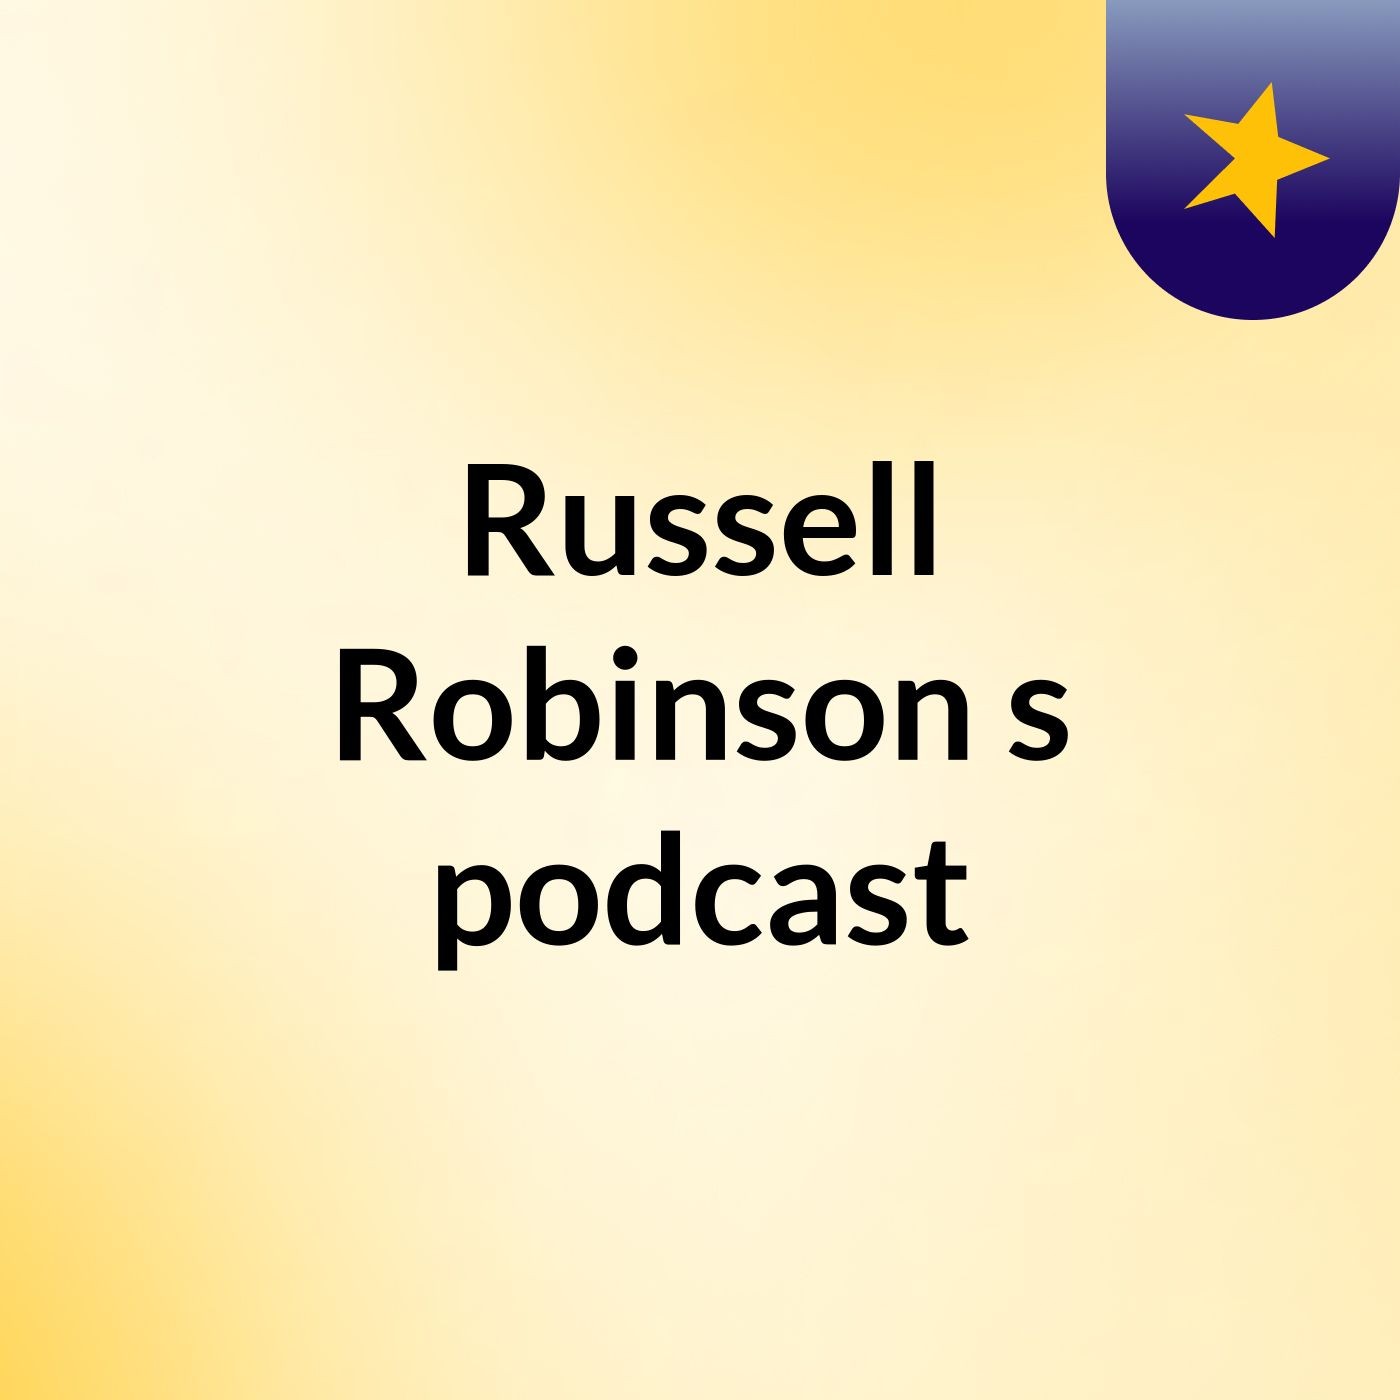 Episode 2 - Russell Robinson's podcast